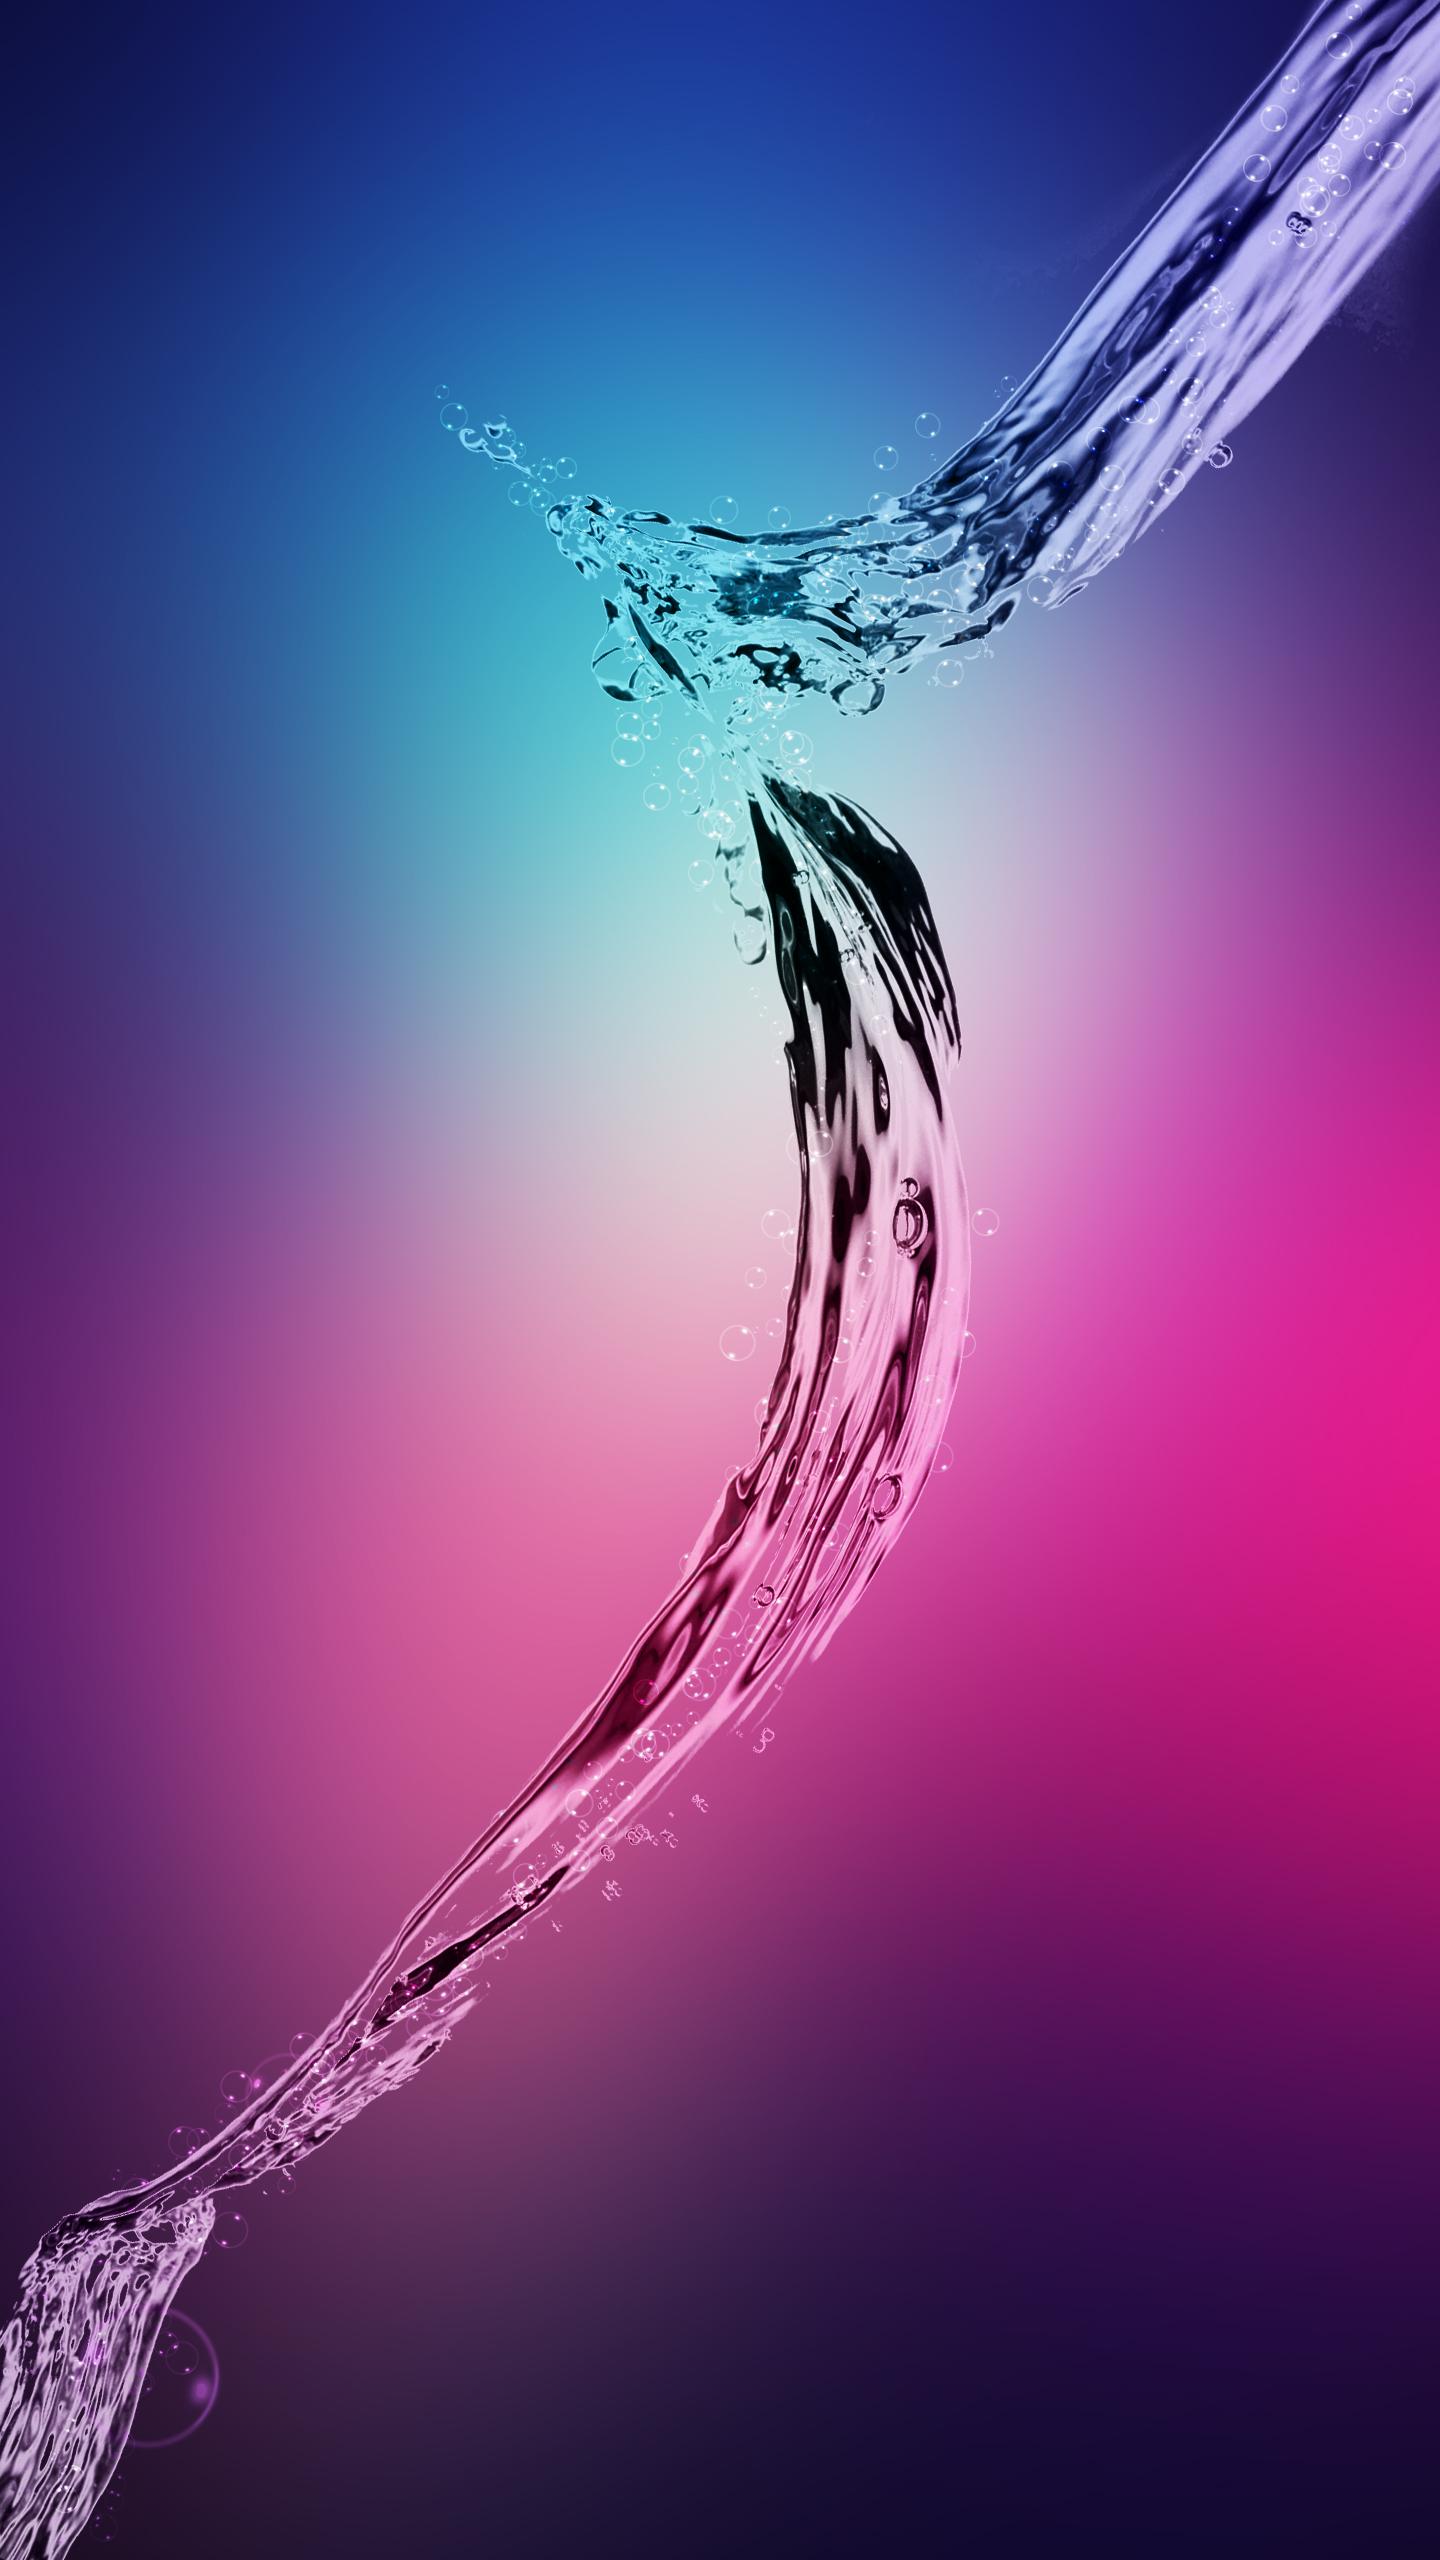 Samsung Galaxy Note 7 Wallpapers - Wallpaper Cave